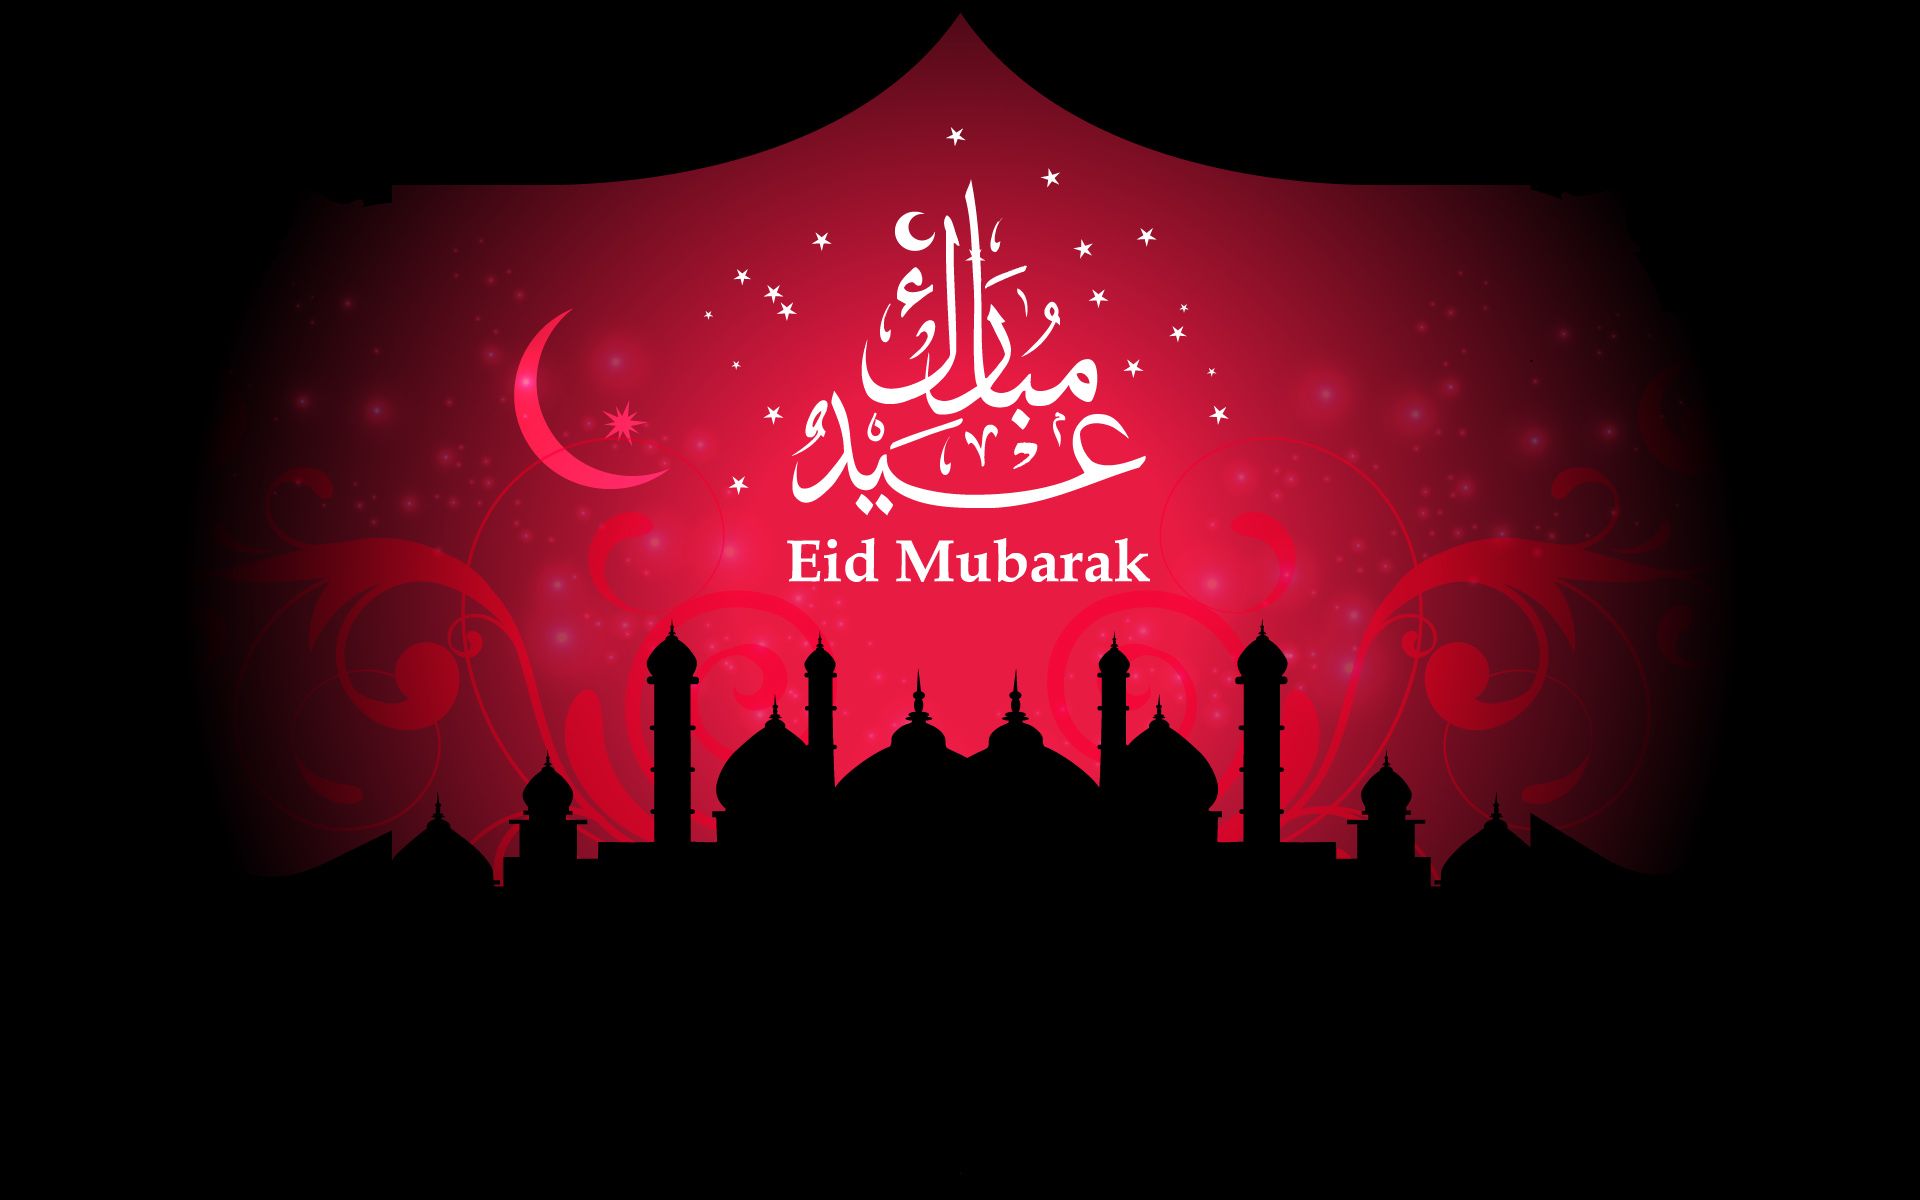 Eid Mubarak 2020 Wishes Images Messages Shayari Greetings SMS Photos  Quotes In Hindi Happy Eid UlFitr 2020 Status DP Whatsapp Stickers And  Facebook Status GIF Wallpaper  Happy Eid 2020 Wishes For